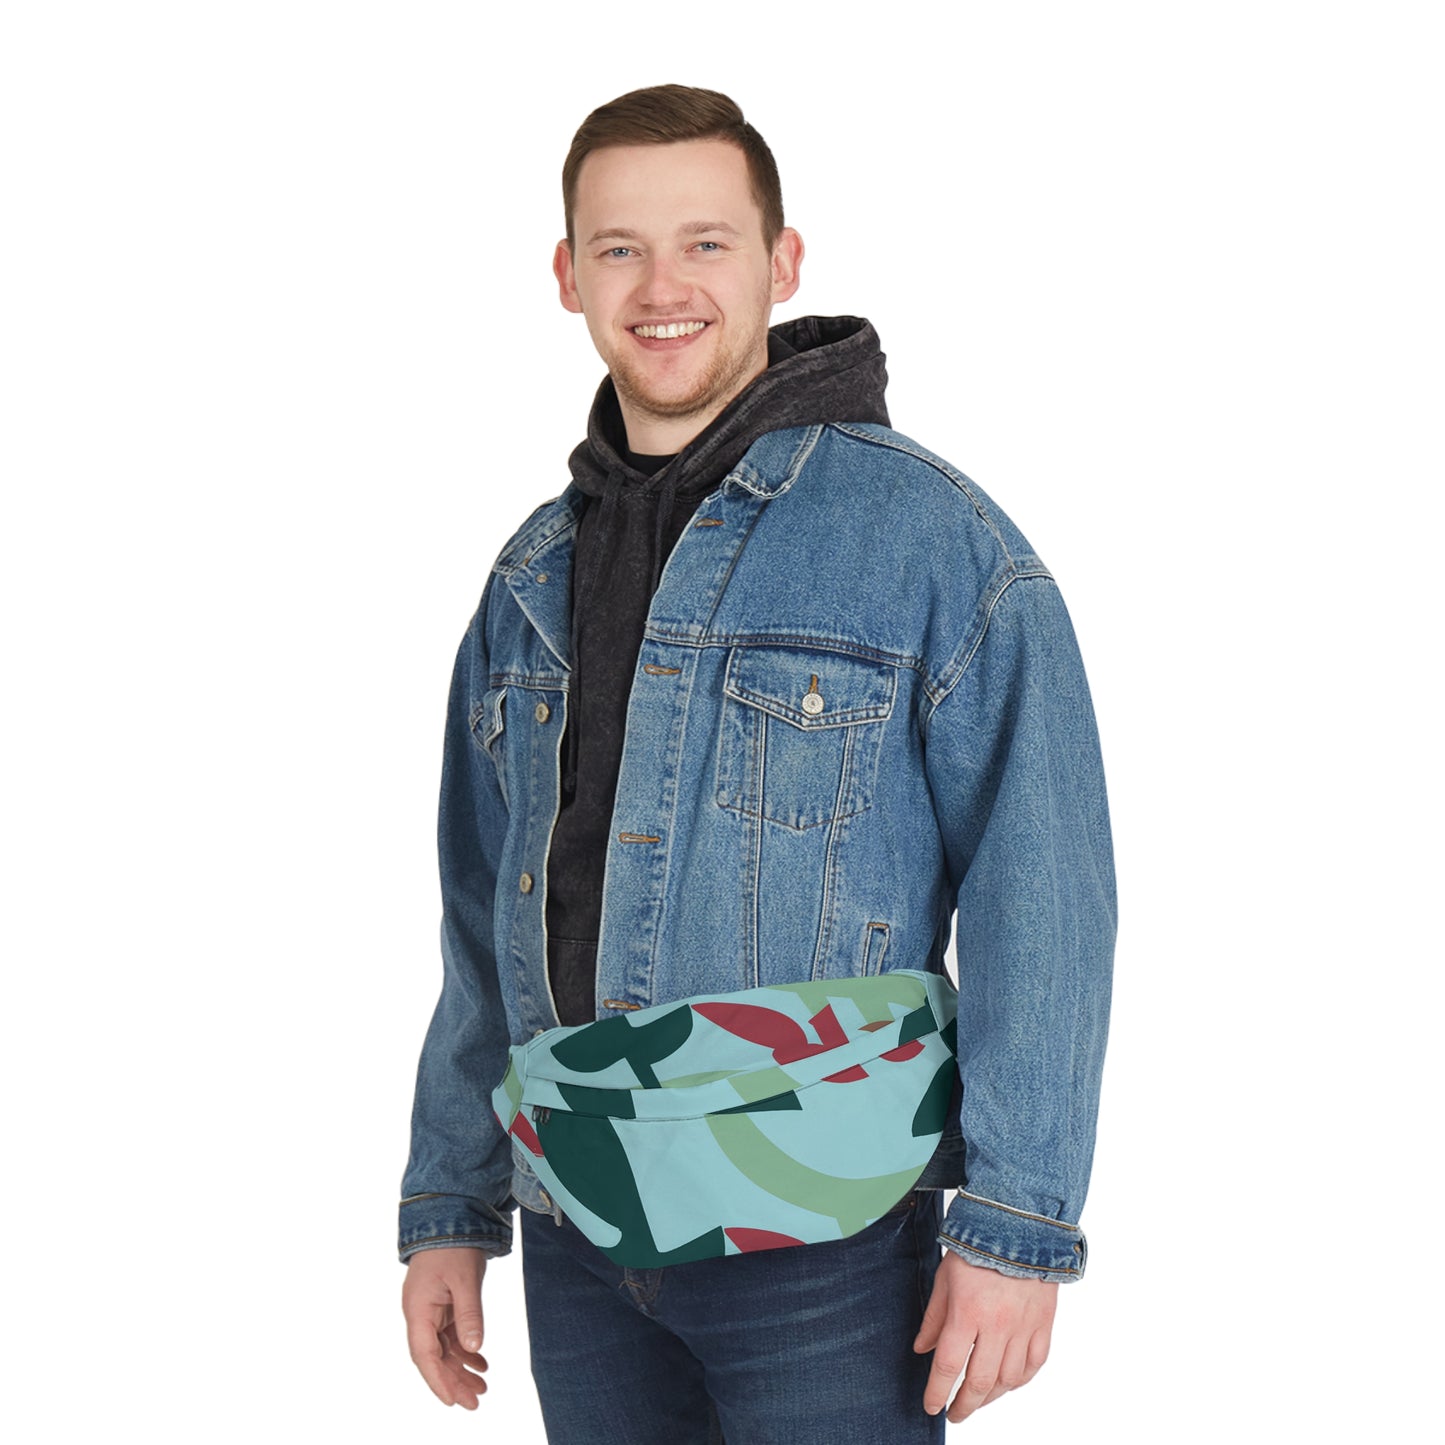 Chaparral Ione - Large Crossbody Fanny Pack